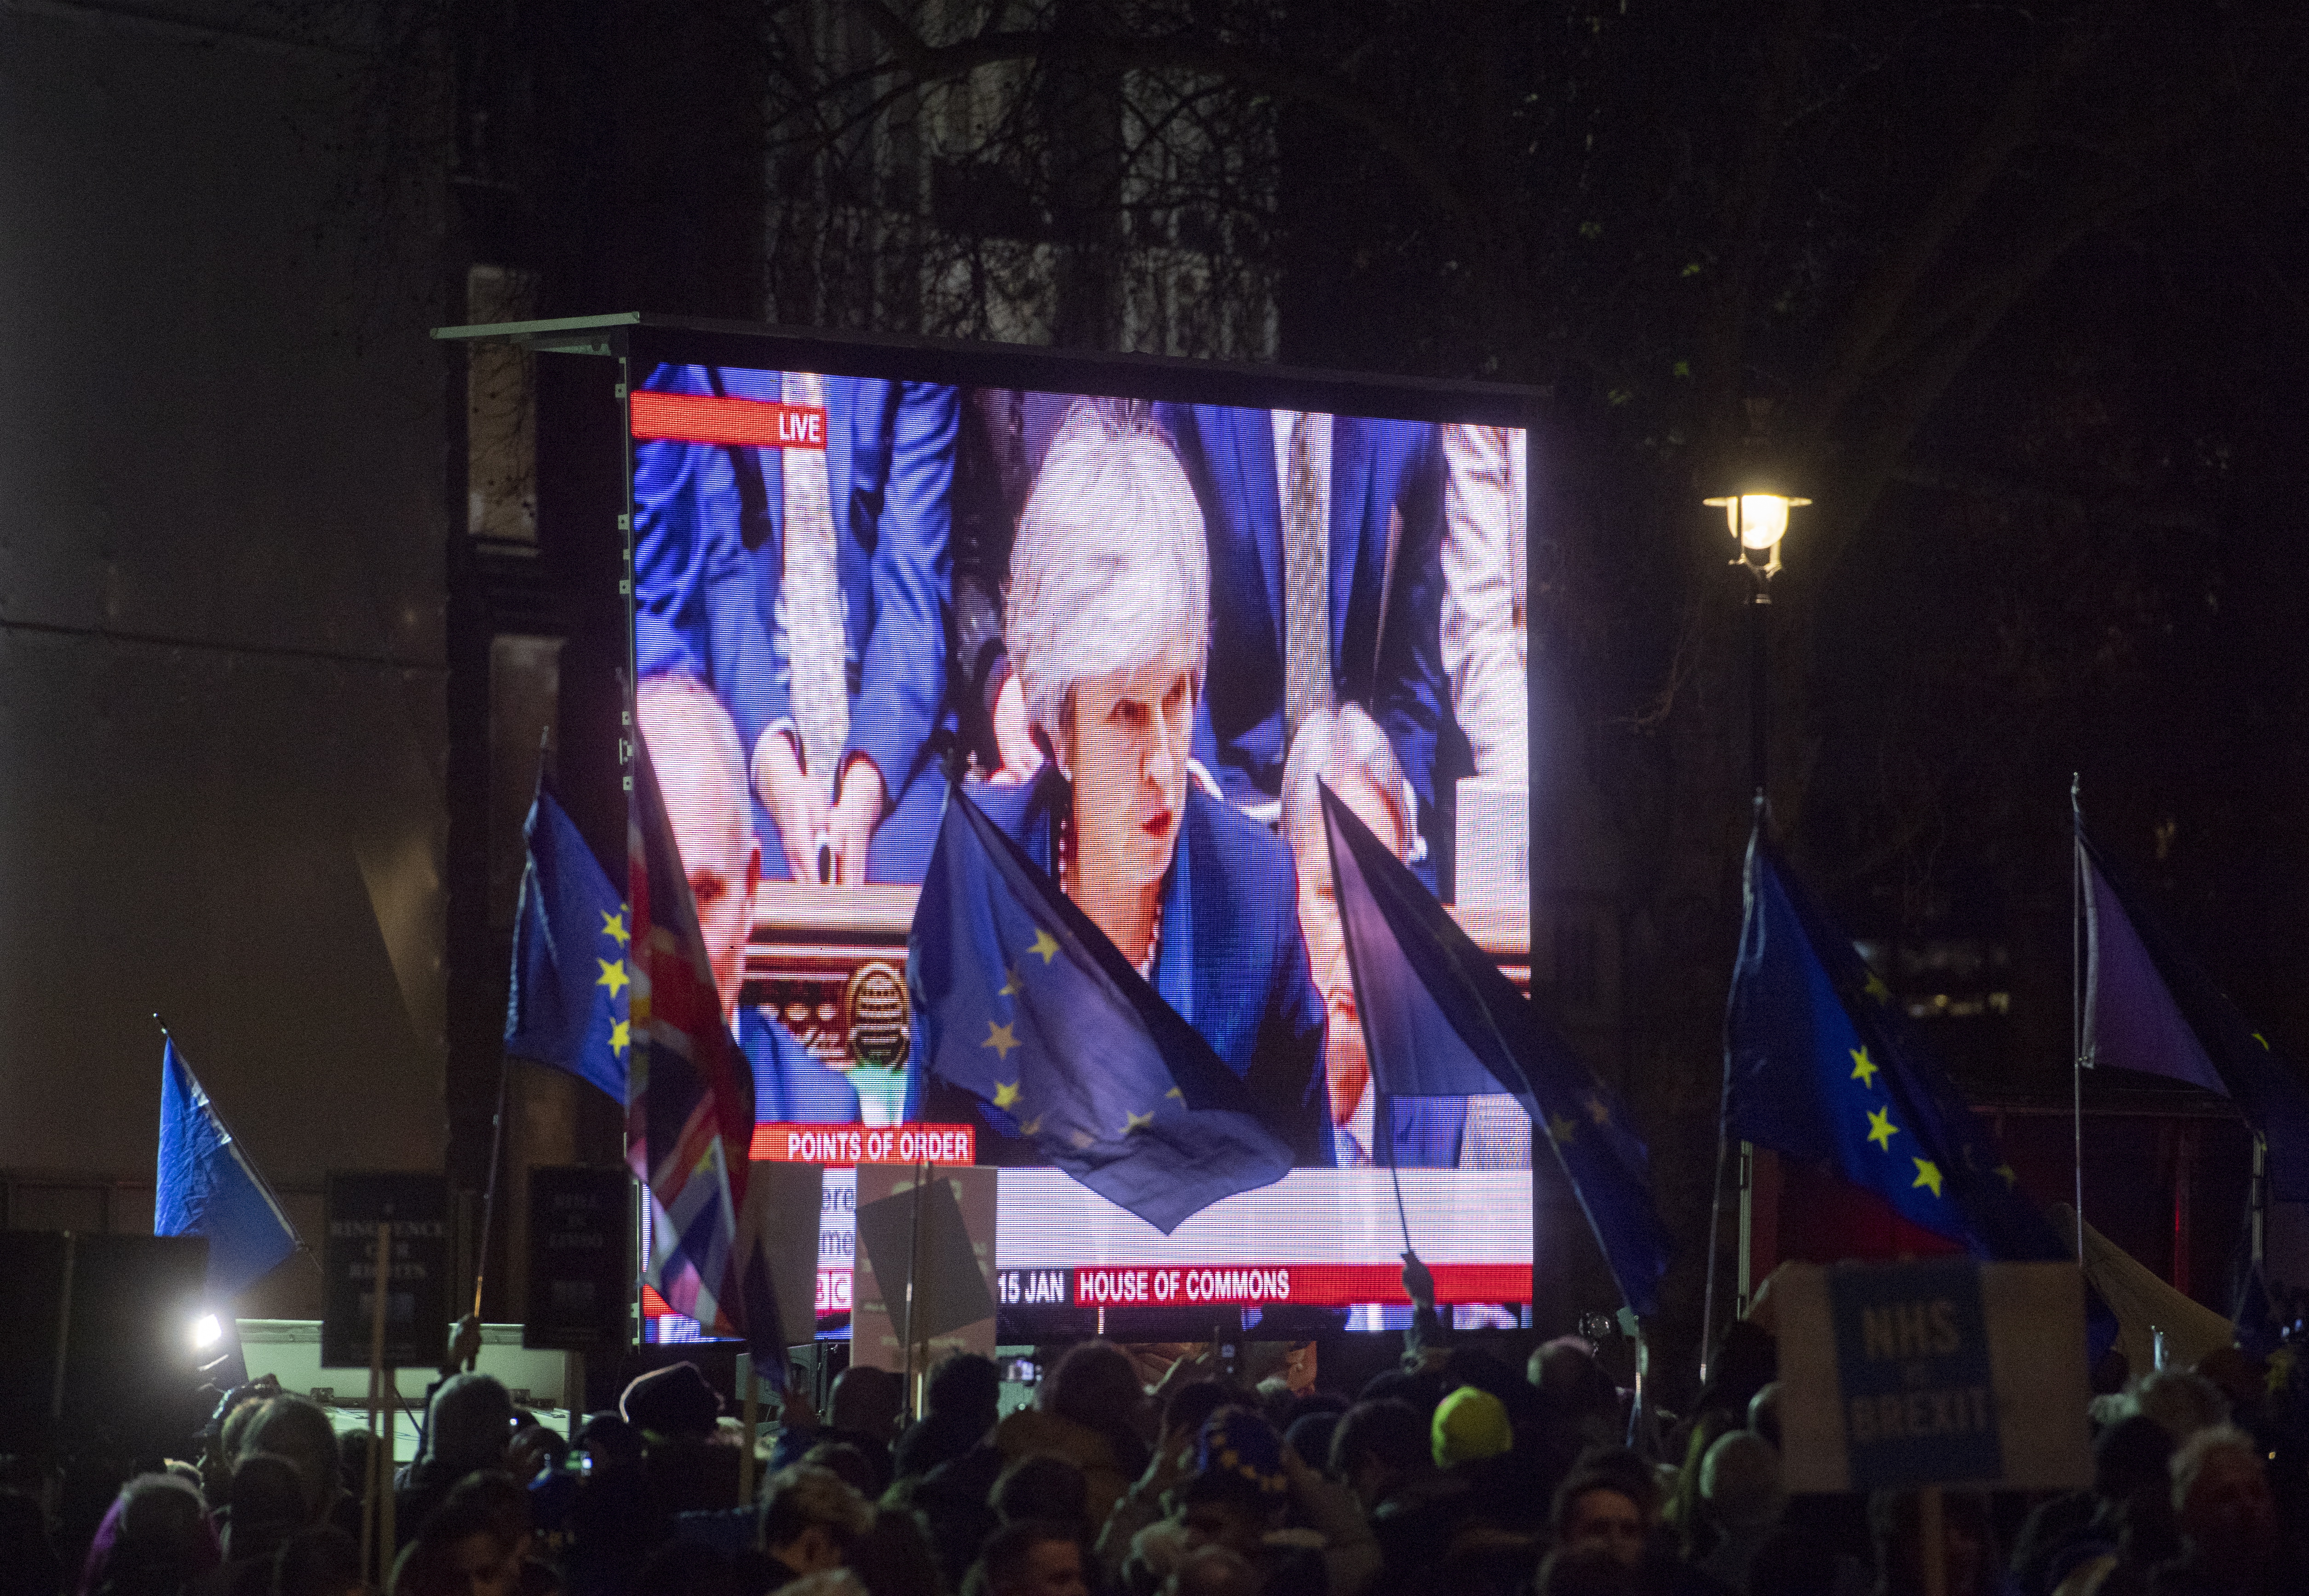 epa07287891 Protesters' flags flutter as Britain's Prime Minister Theresa May makes a statement on a video screen outside the Houses of Parliament after being defeated in the vote on Brexit EU Withdrawal Agreement in London, Britain, 15 January 2019. Parliamentarians voted on the postponed Brexit EU Withdrawal Agreement, commonly known as The Meaningful Vote, deciding on Britain's future relationship with the European Union.  EPA/FACUNDO ARRIZABALAGA